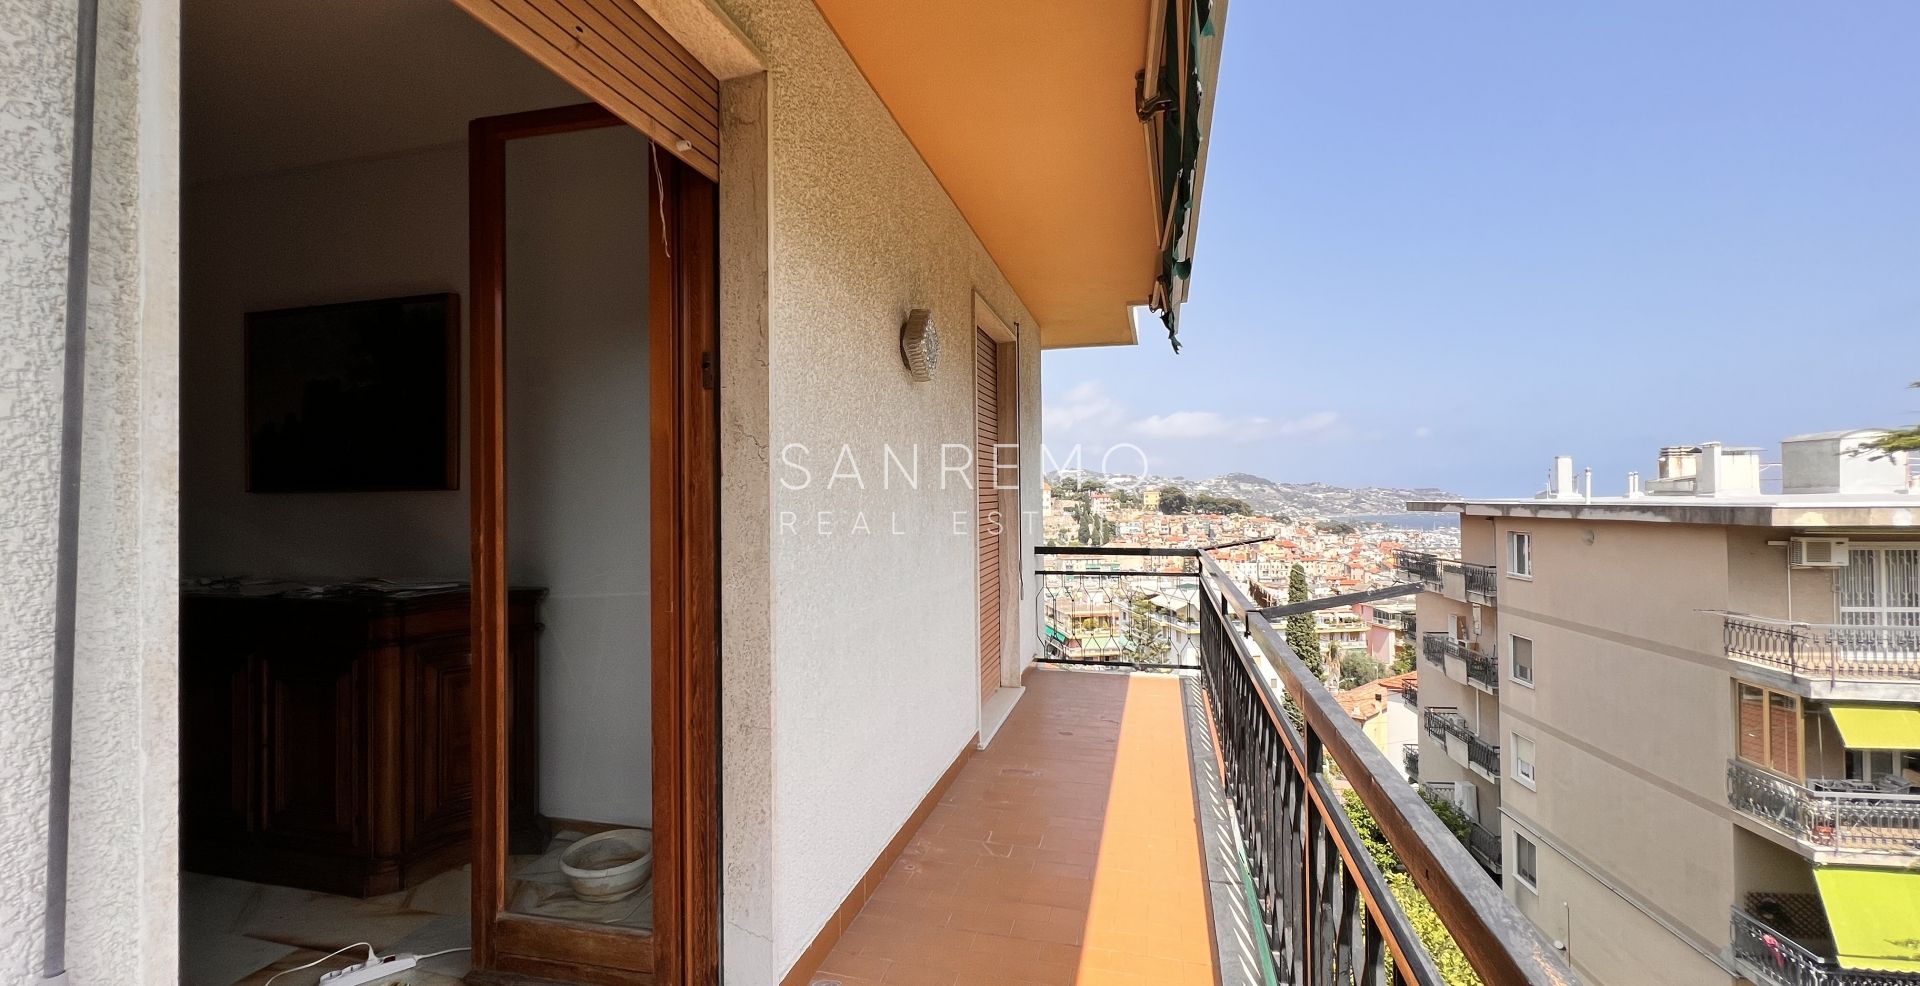 90 sqm. apartment with nice sea view and parking